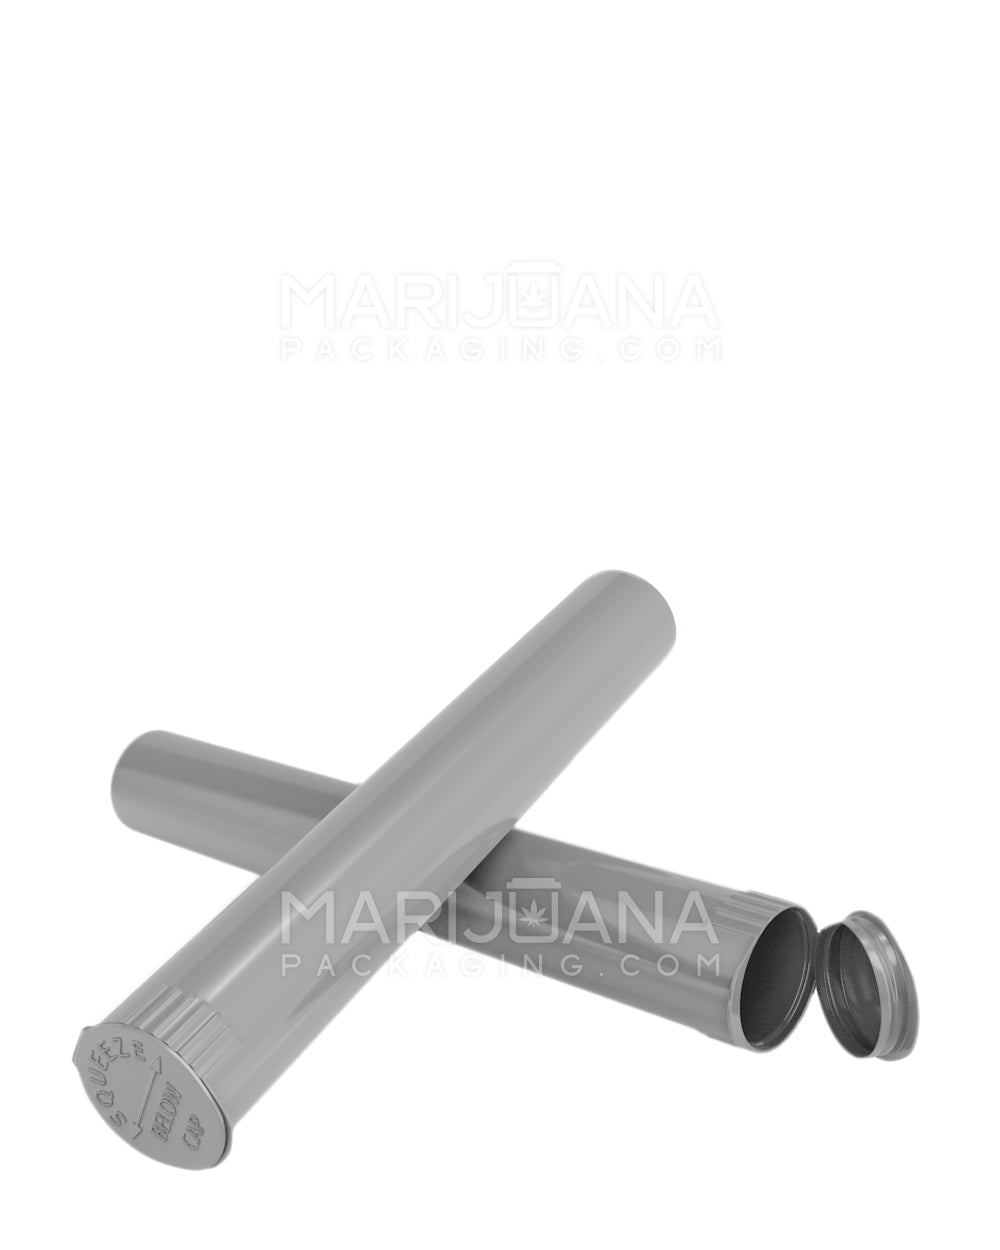 Child Resistant | King Size Pop Top Opaque Plastic Pre-Roll Tubes | 116mm - Silver - 1000 Count